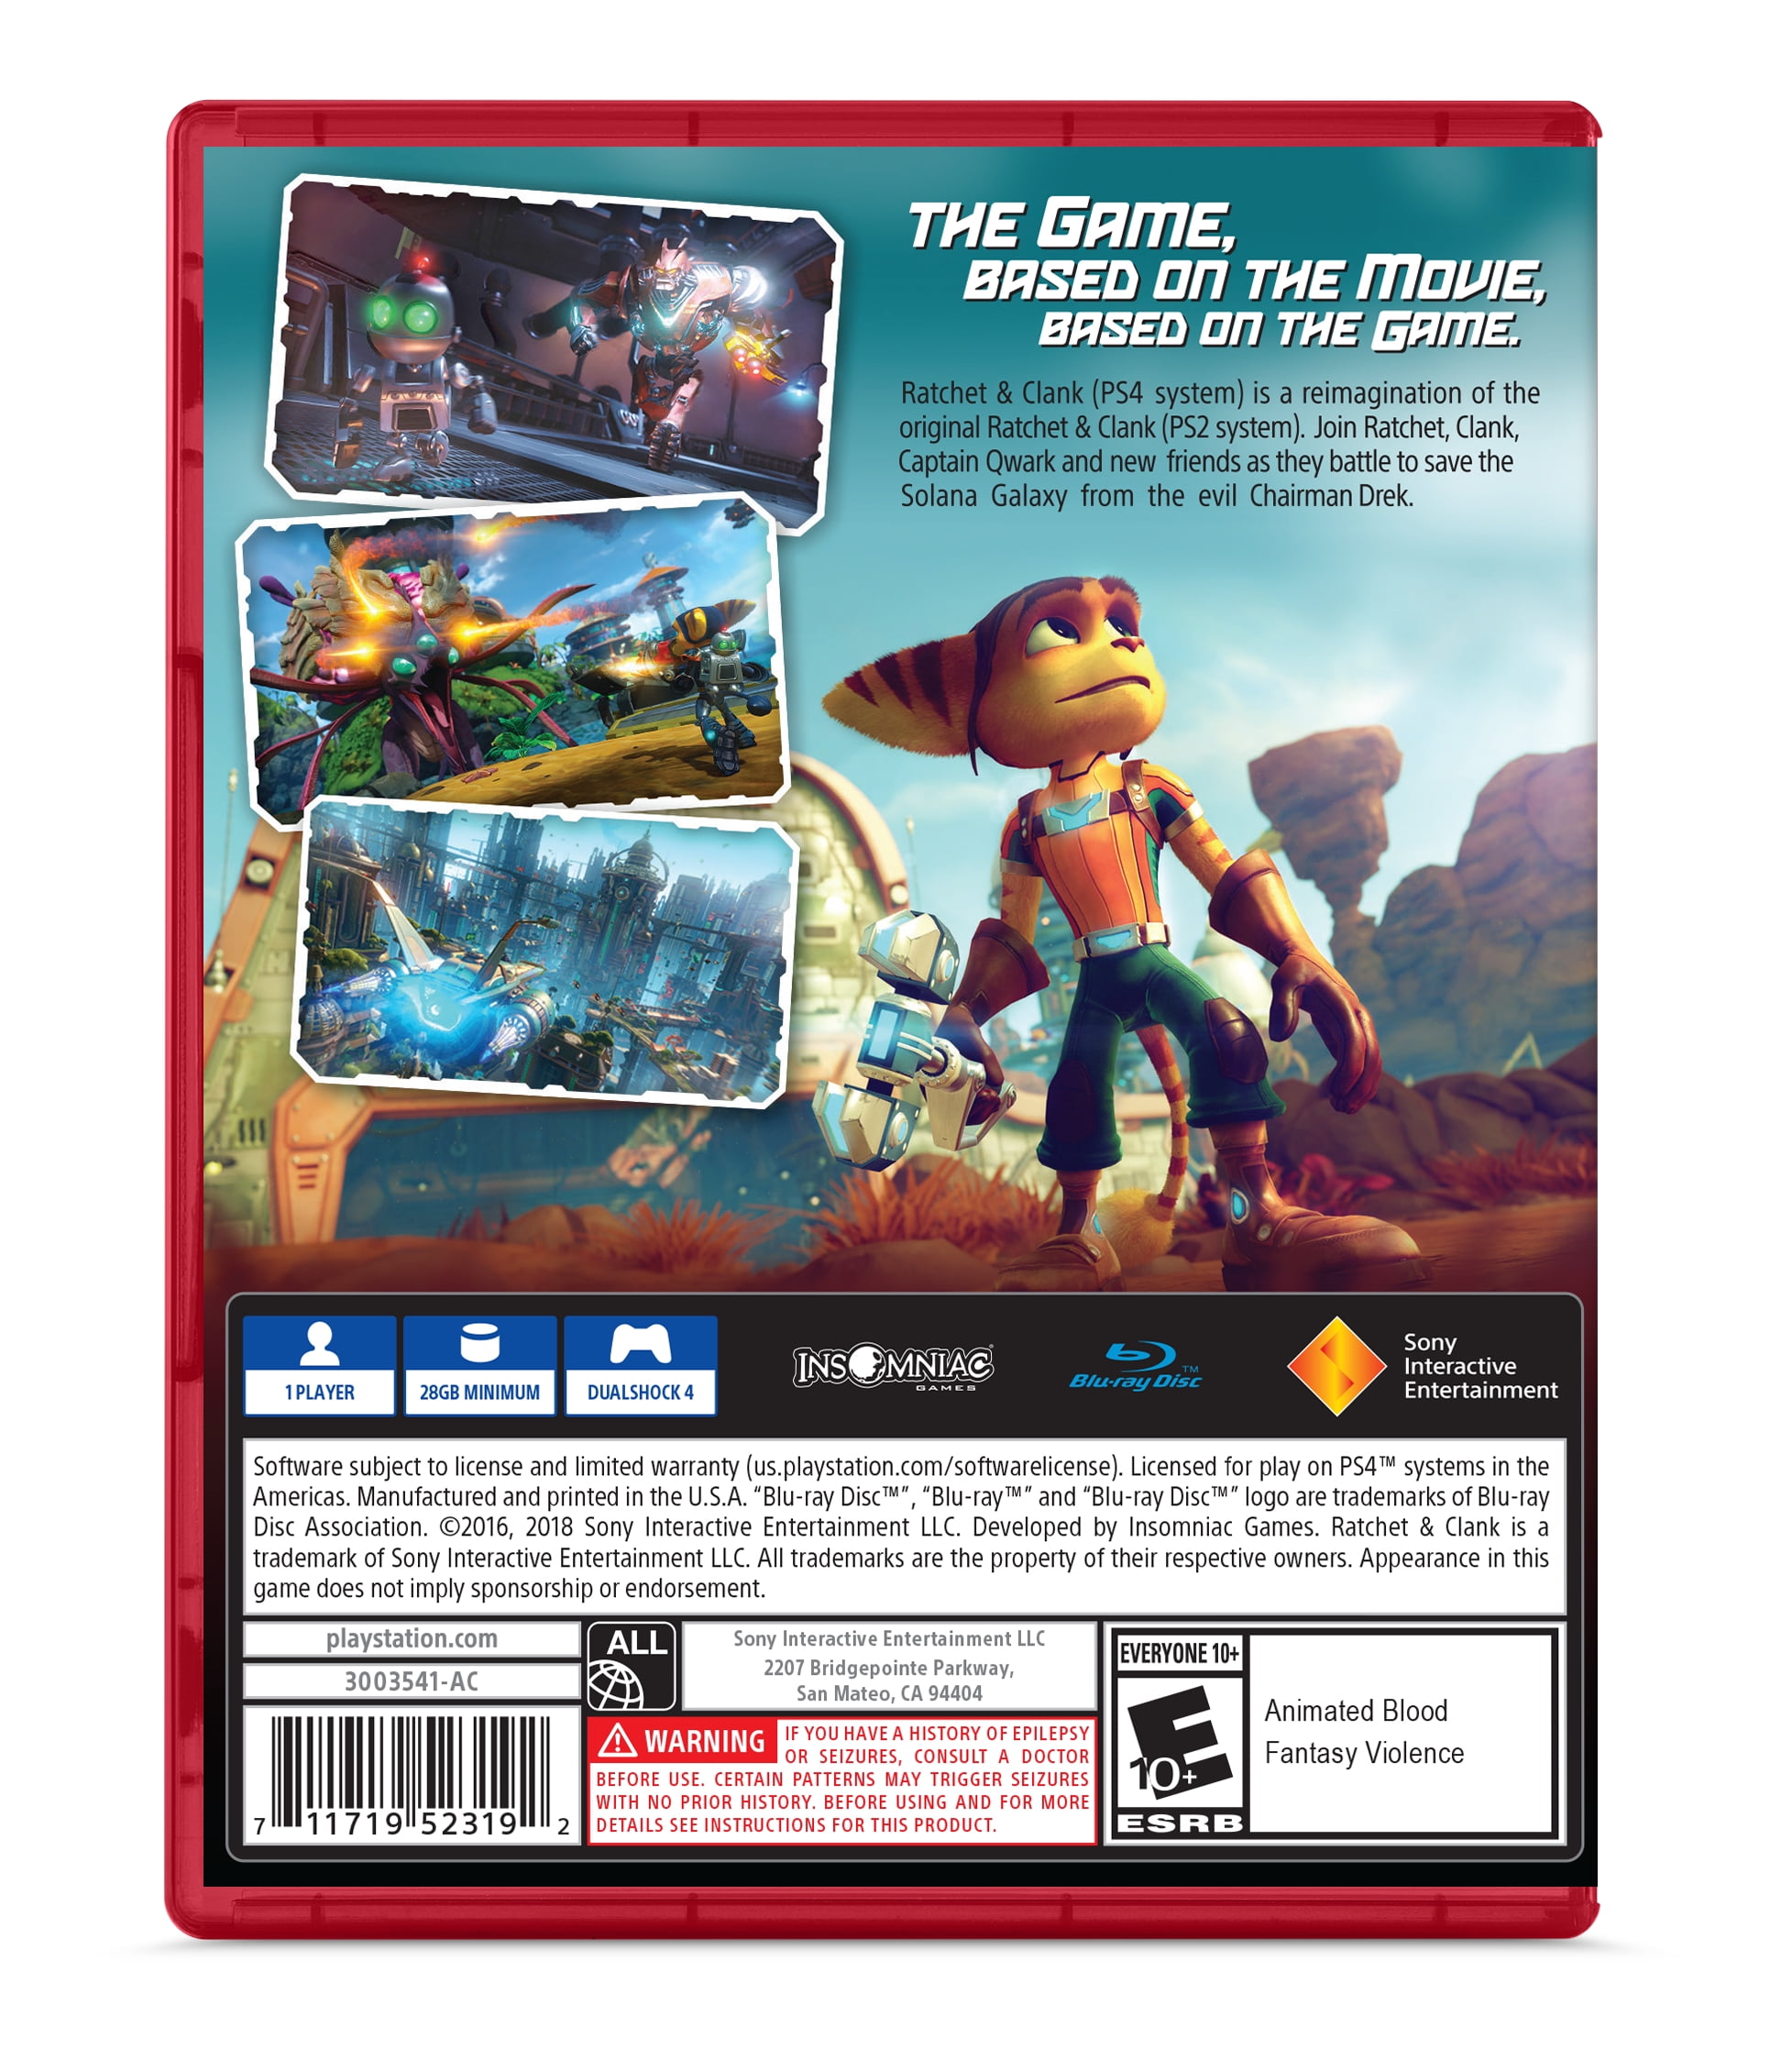 Ratchet & Clank PS4 free to keep in March with latest Sony Play at